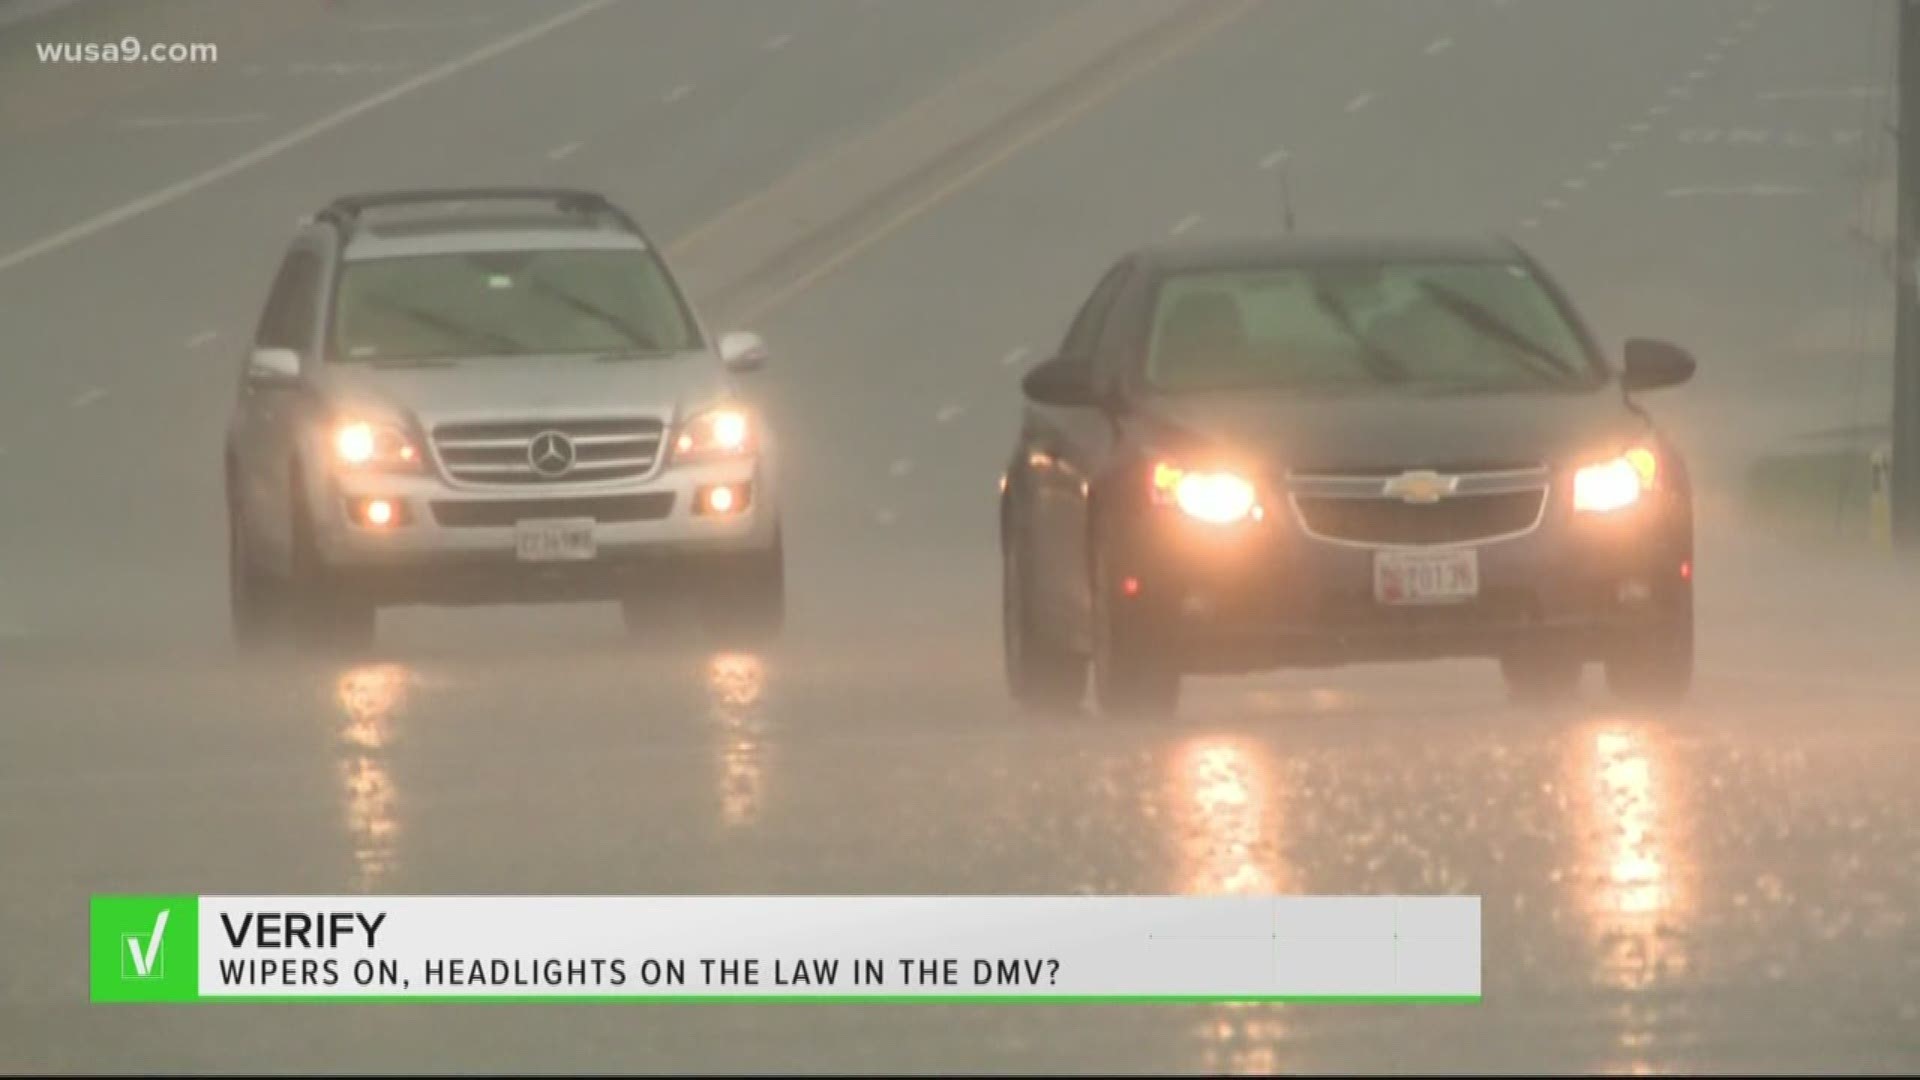 After seeing many cars without lights on driving in the rain, a viewer asked does the law require you to turn your headlines on when your wipers are on?